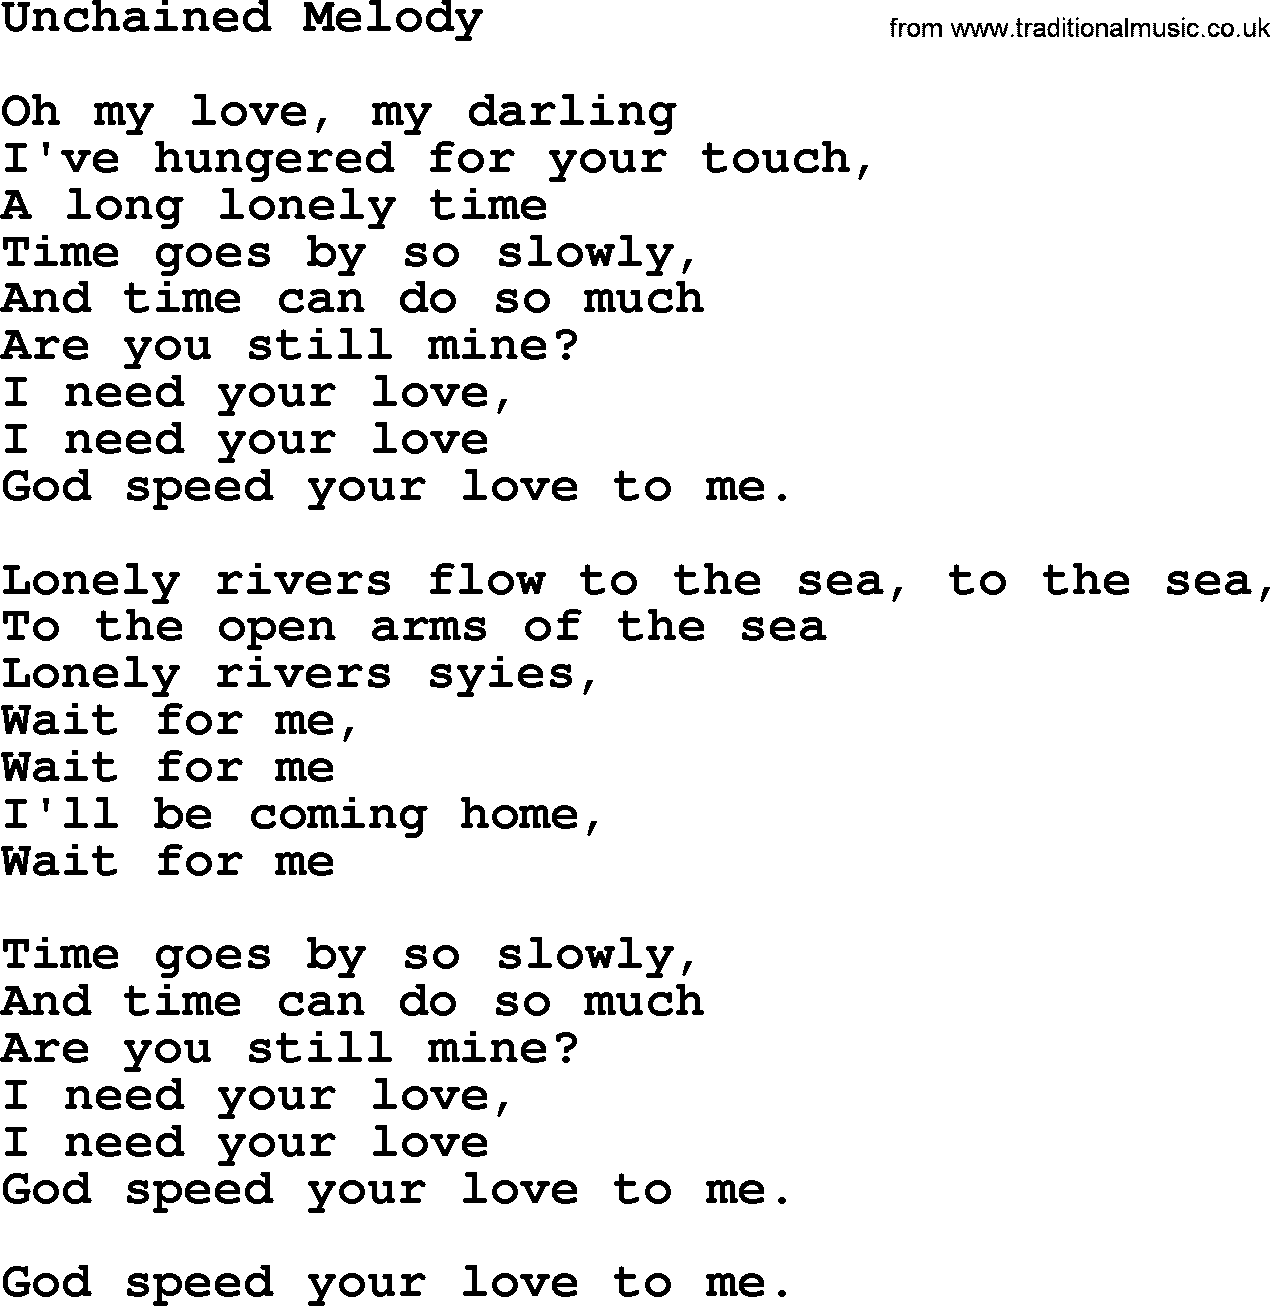 Willie Nelson song: Unchained Melody lyrics